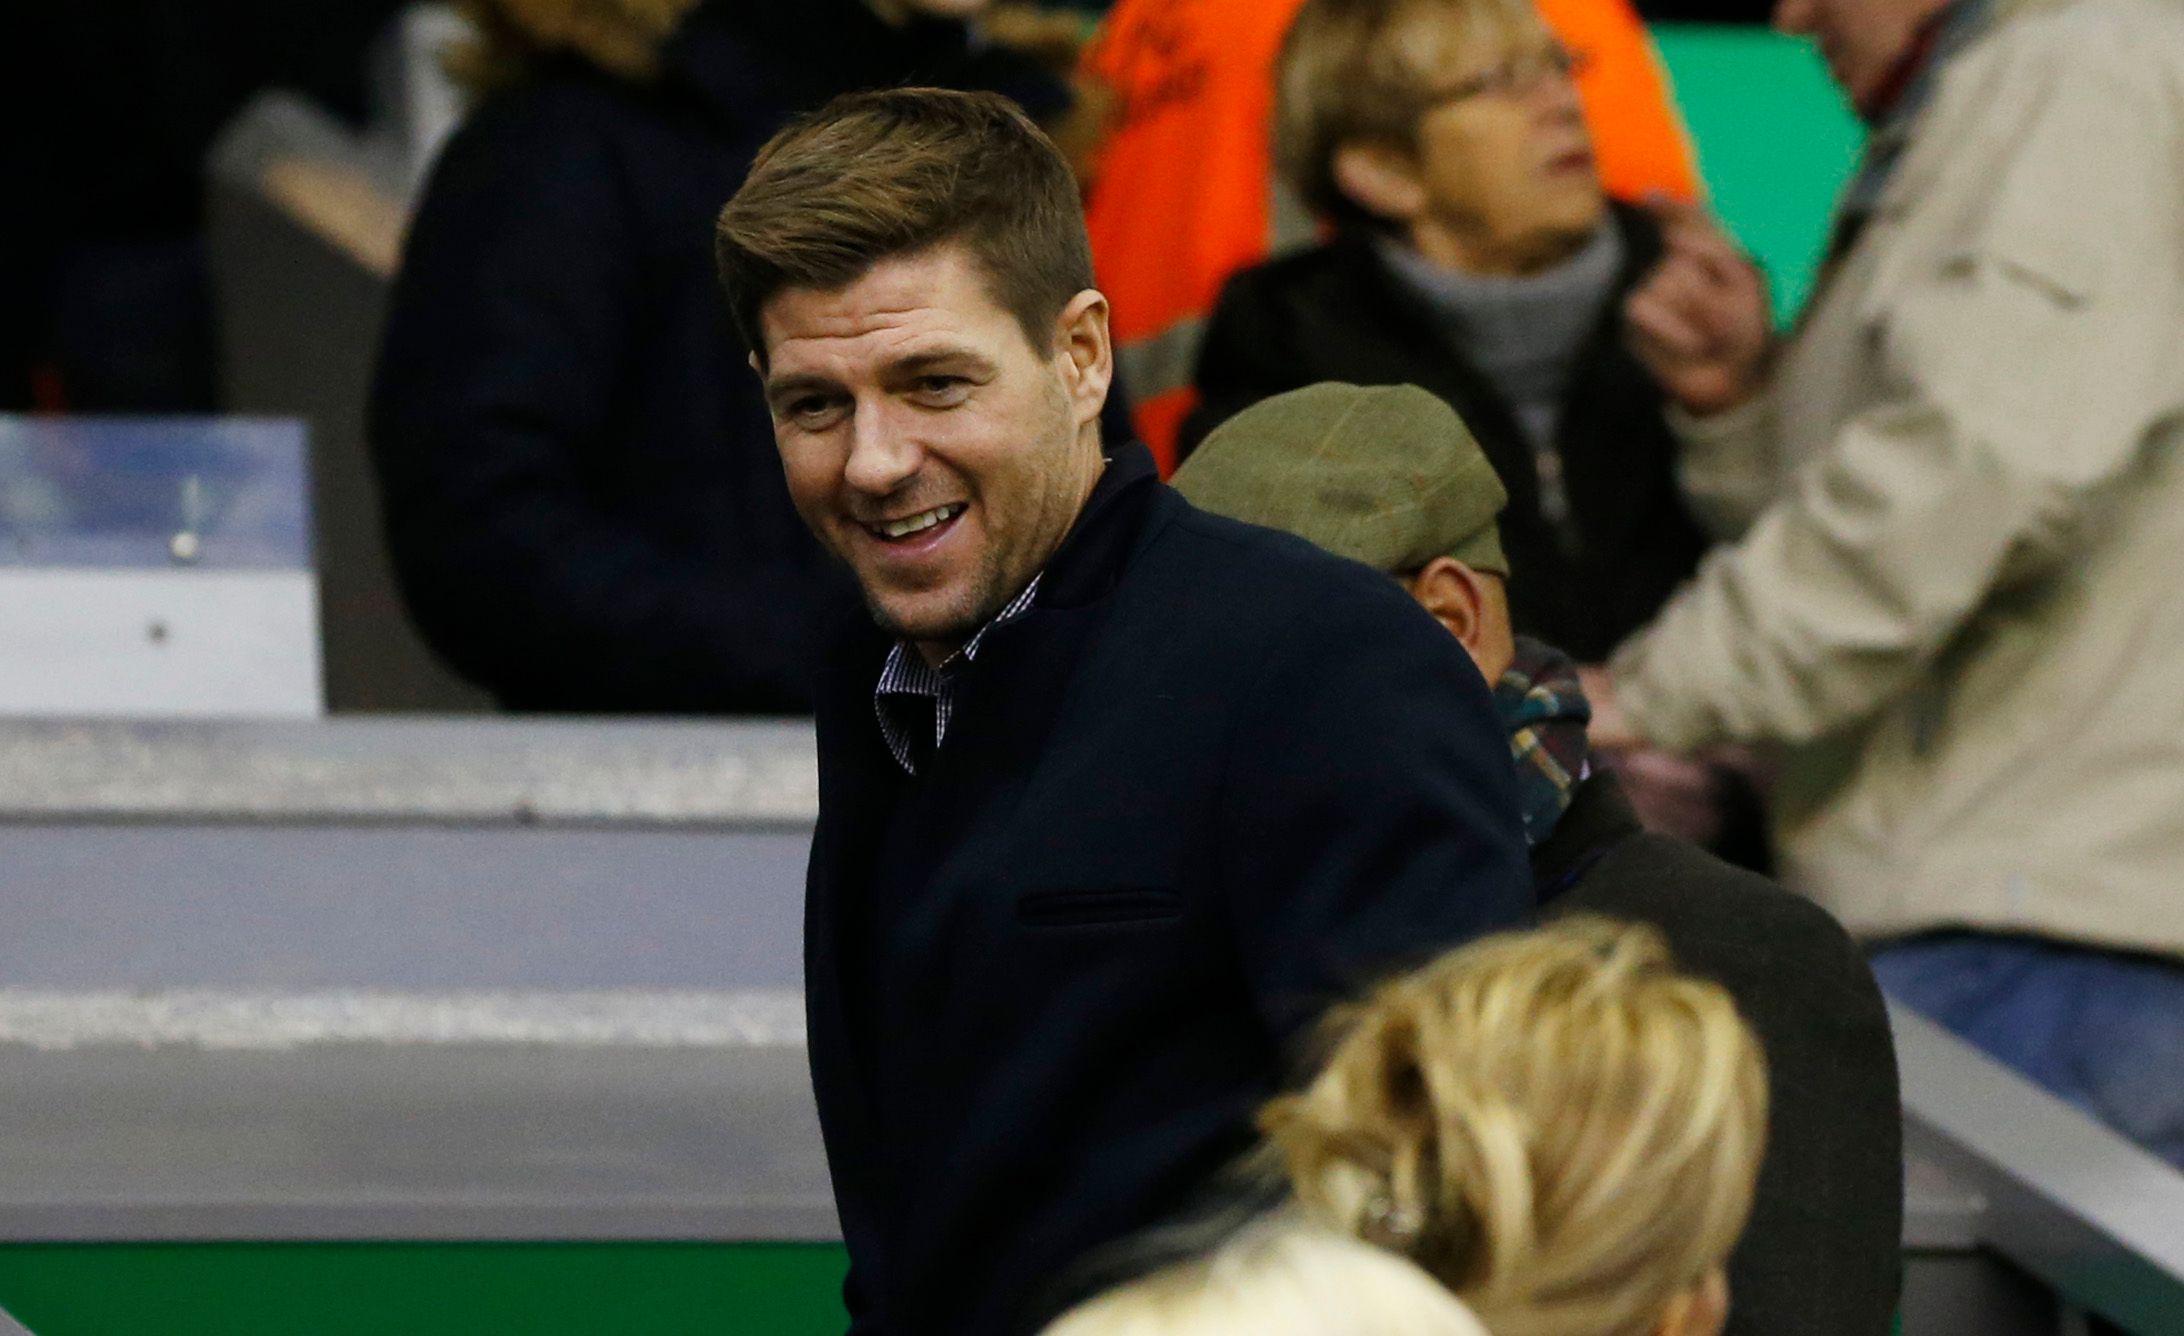 Football Soccer - Liverpool v Swansea City - Barclays Premier League - Anfield - 29/11/15 
Former Liverpool Steven Gerrard in the stands before the match 
Reuters / Phil Noble 
Livepic 
EDITORIAL USE ONLY. No use with unauthorized audio, video, data, fixture lists, club/league logos or 